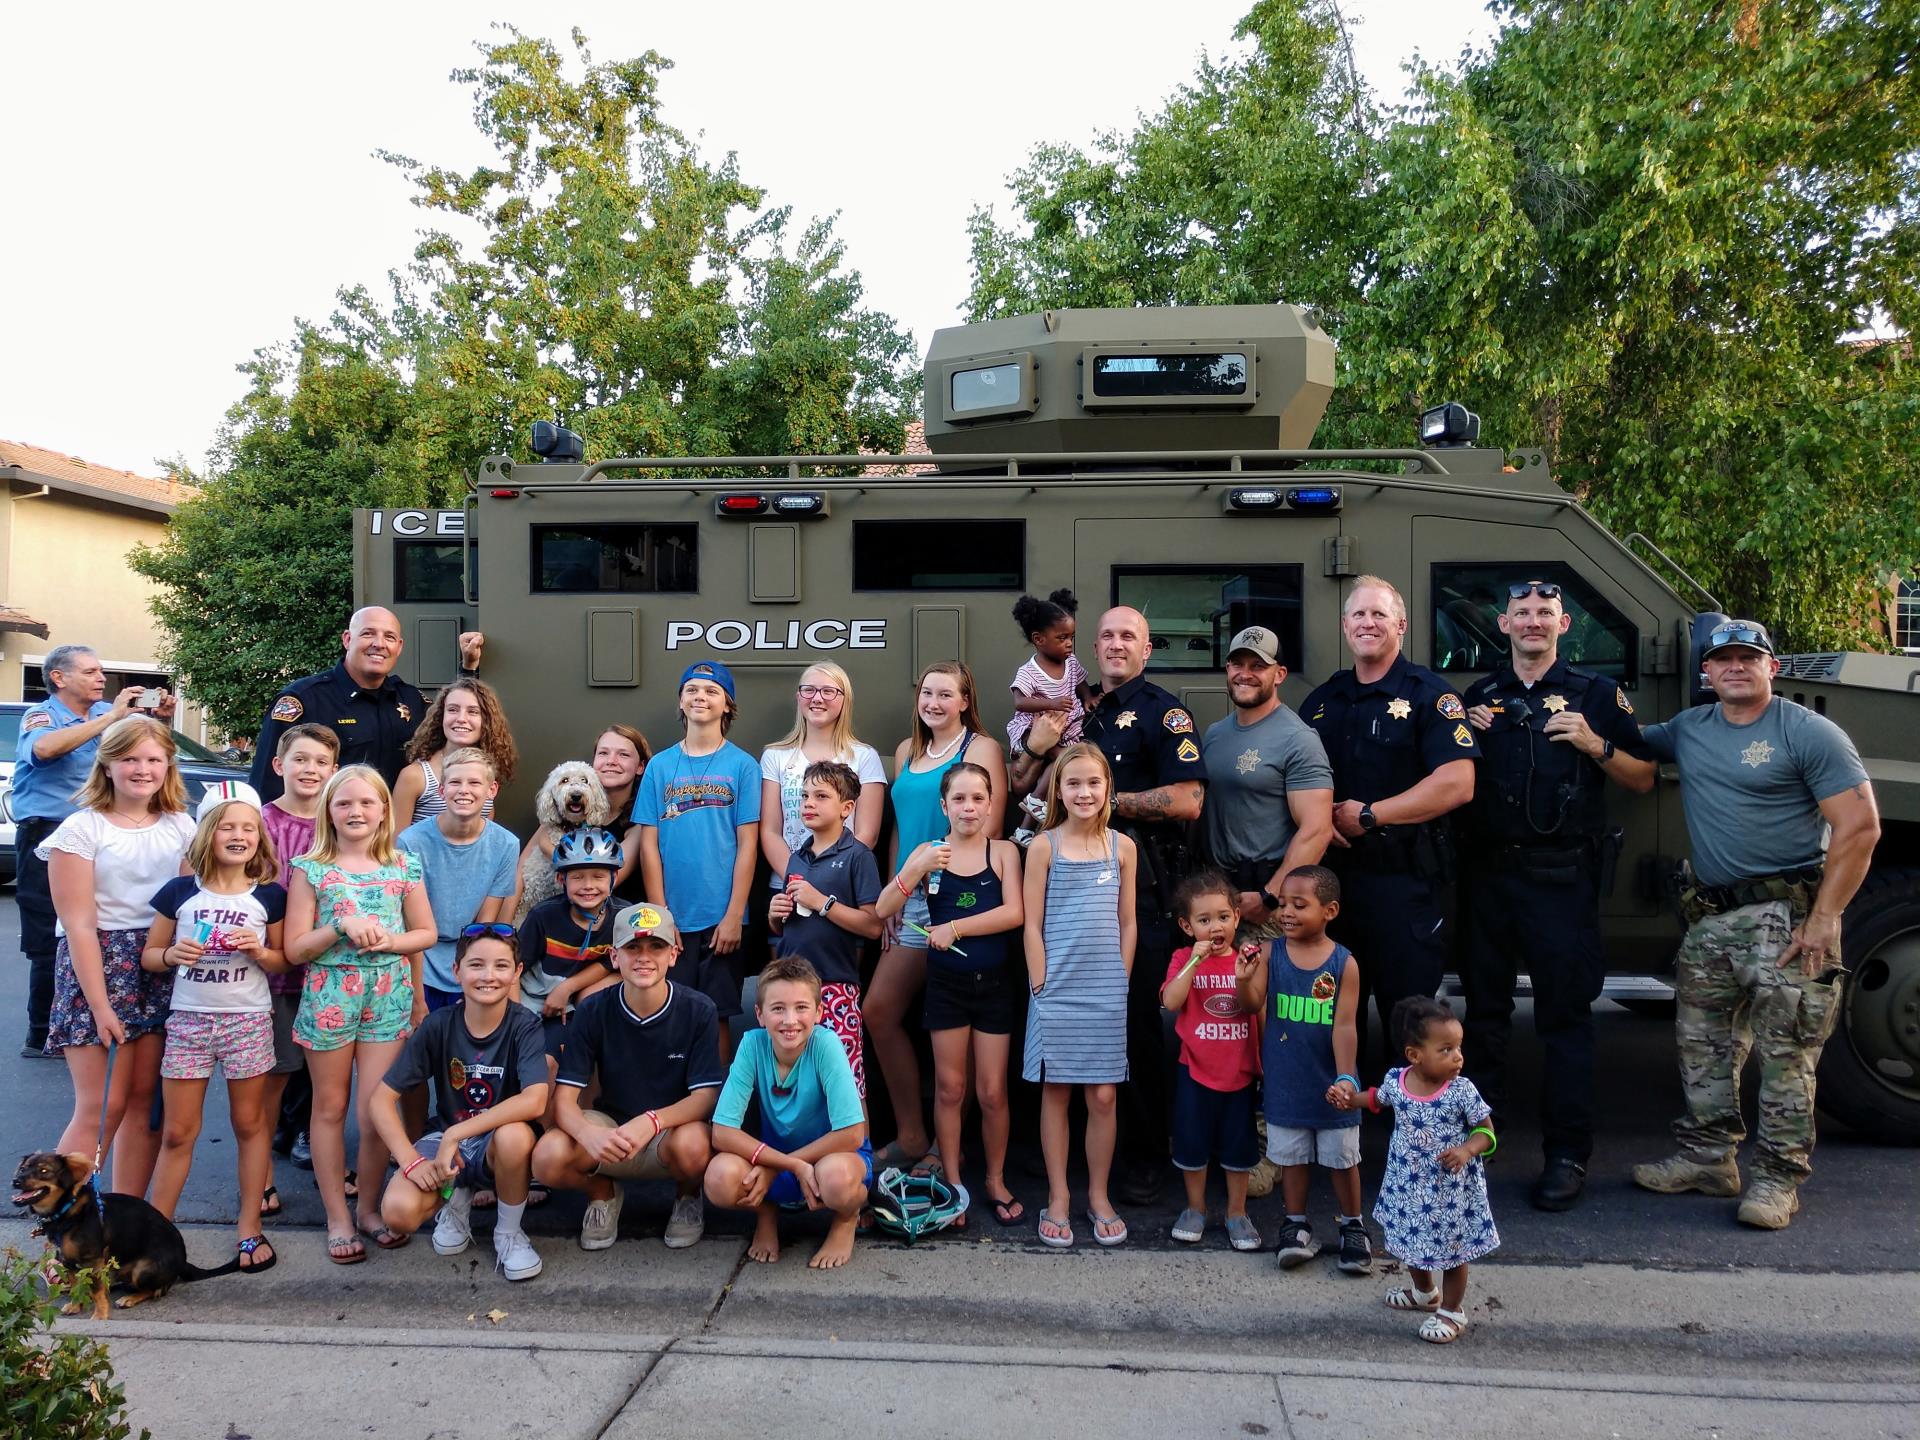 A neighborhood group from National Night Out 2019 with Police Officers in front of SWAT Vehicle